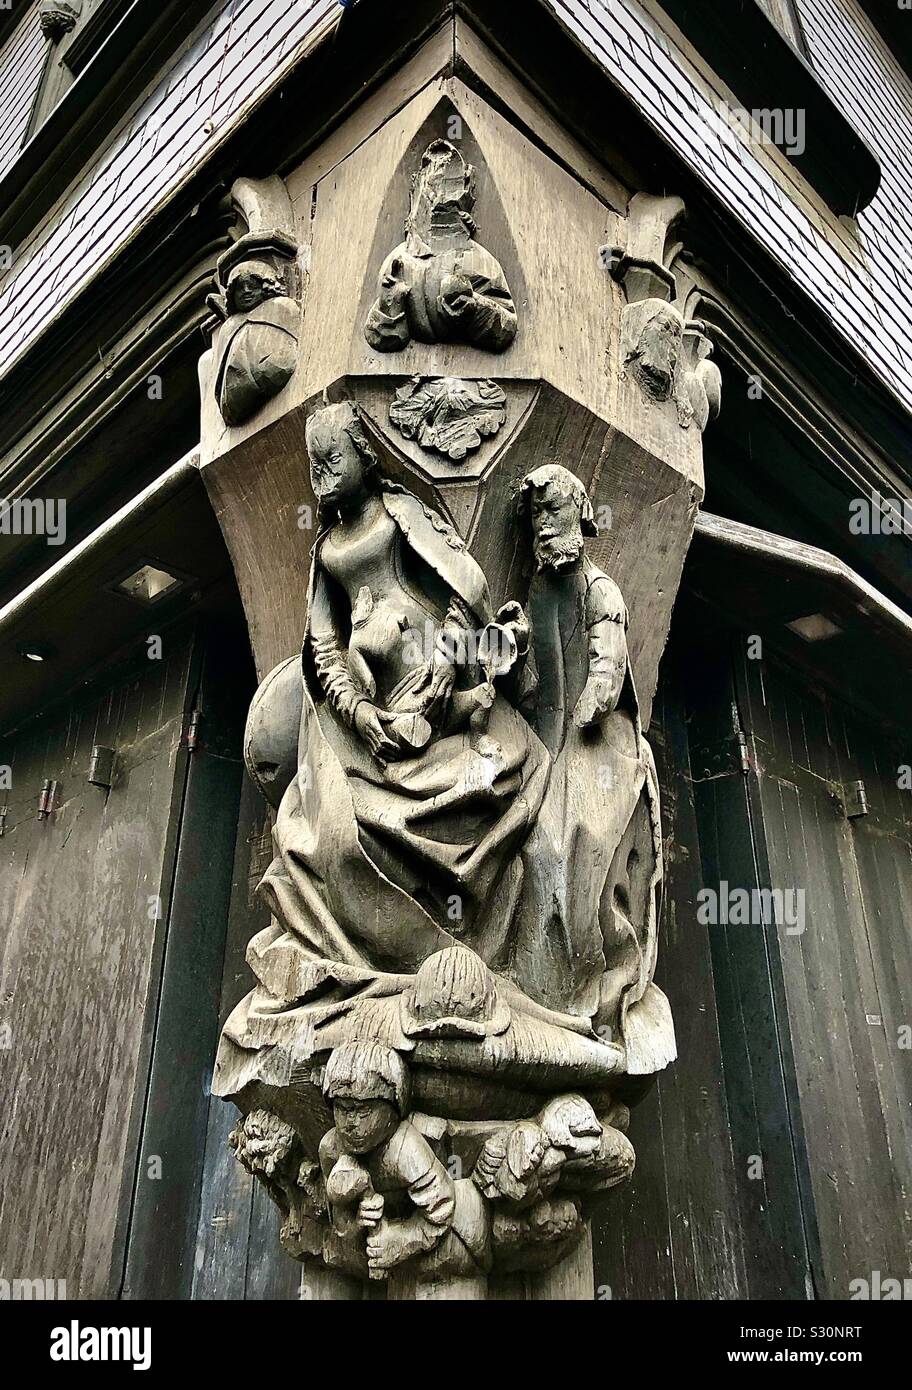 Ornate 15/16th century medieval wood carving of figures on corner of Place Plumereau, Tours, Indre-et-Loire, France. Stock Photo